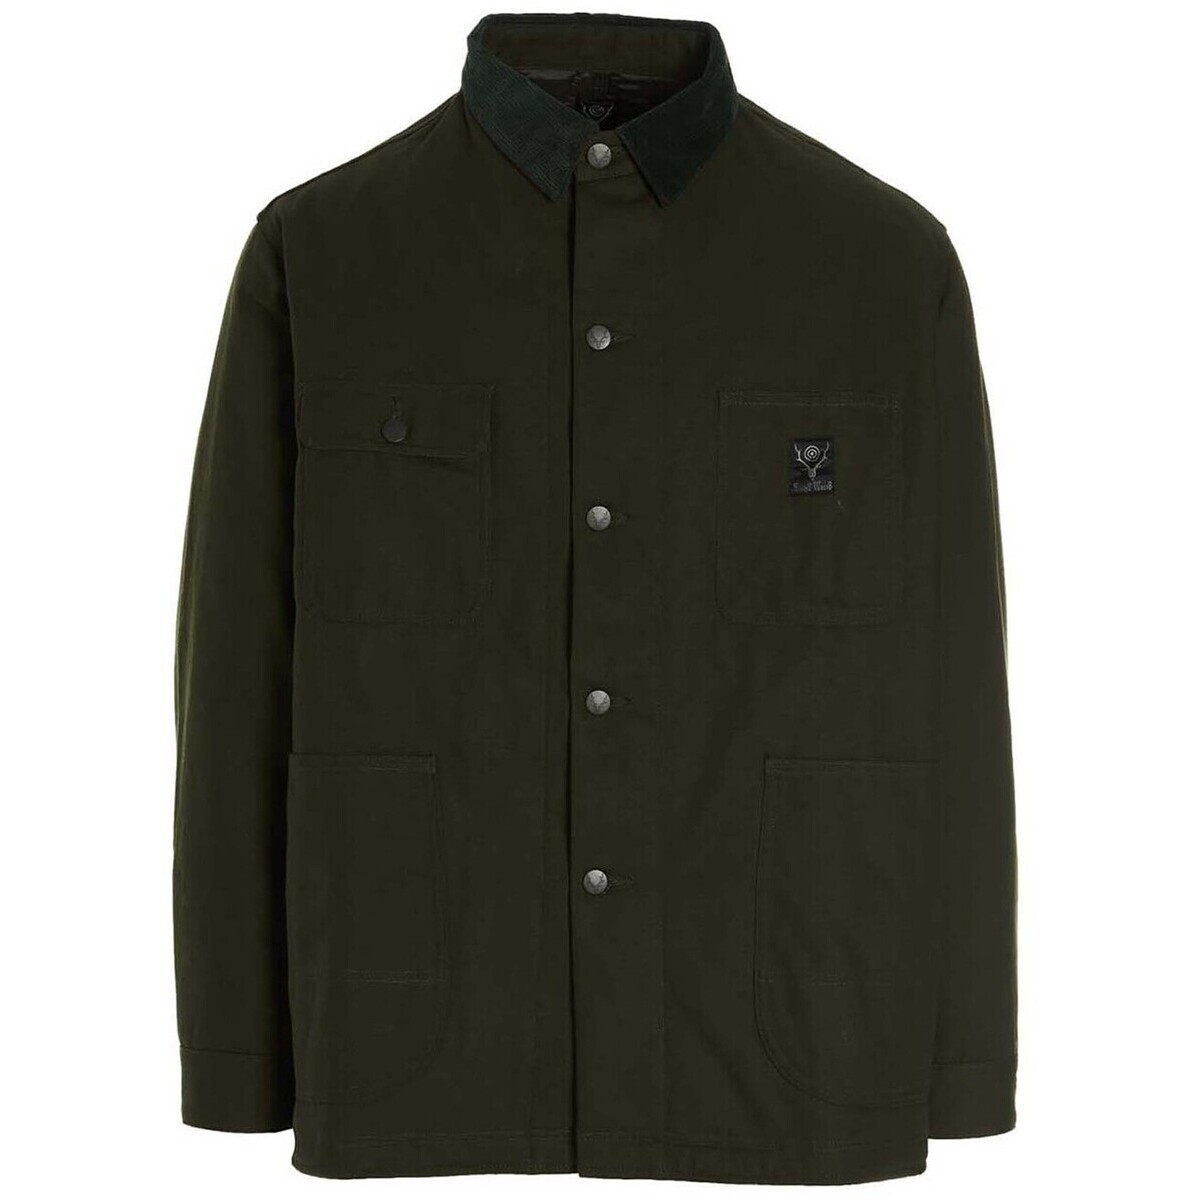 SOUTH2 WEST8 サウスツーウエストエイト グリーン Green 'Coverall' jacket コート メンズ 秋冬2022 LQ709AGREEN 【関税・送料無料】【ラッピング無料】 ju